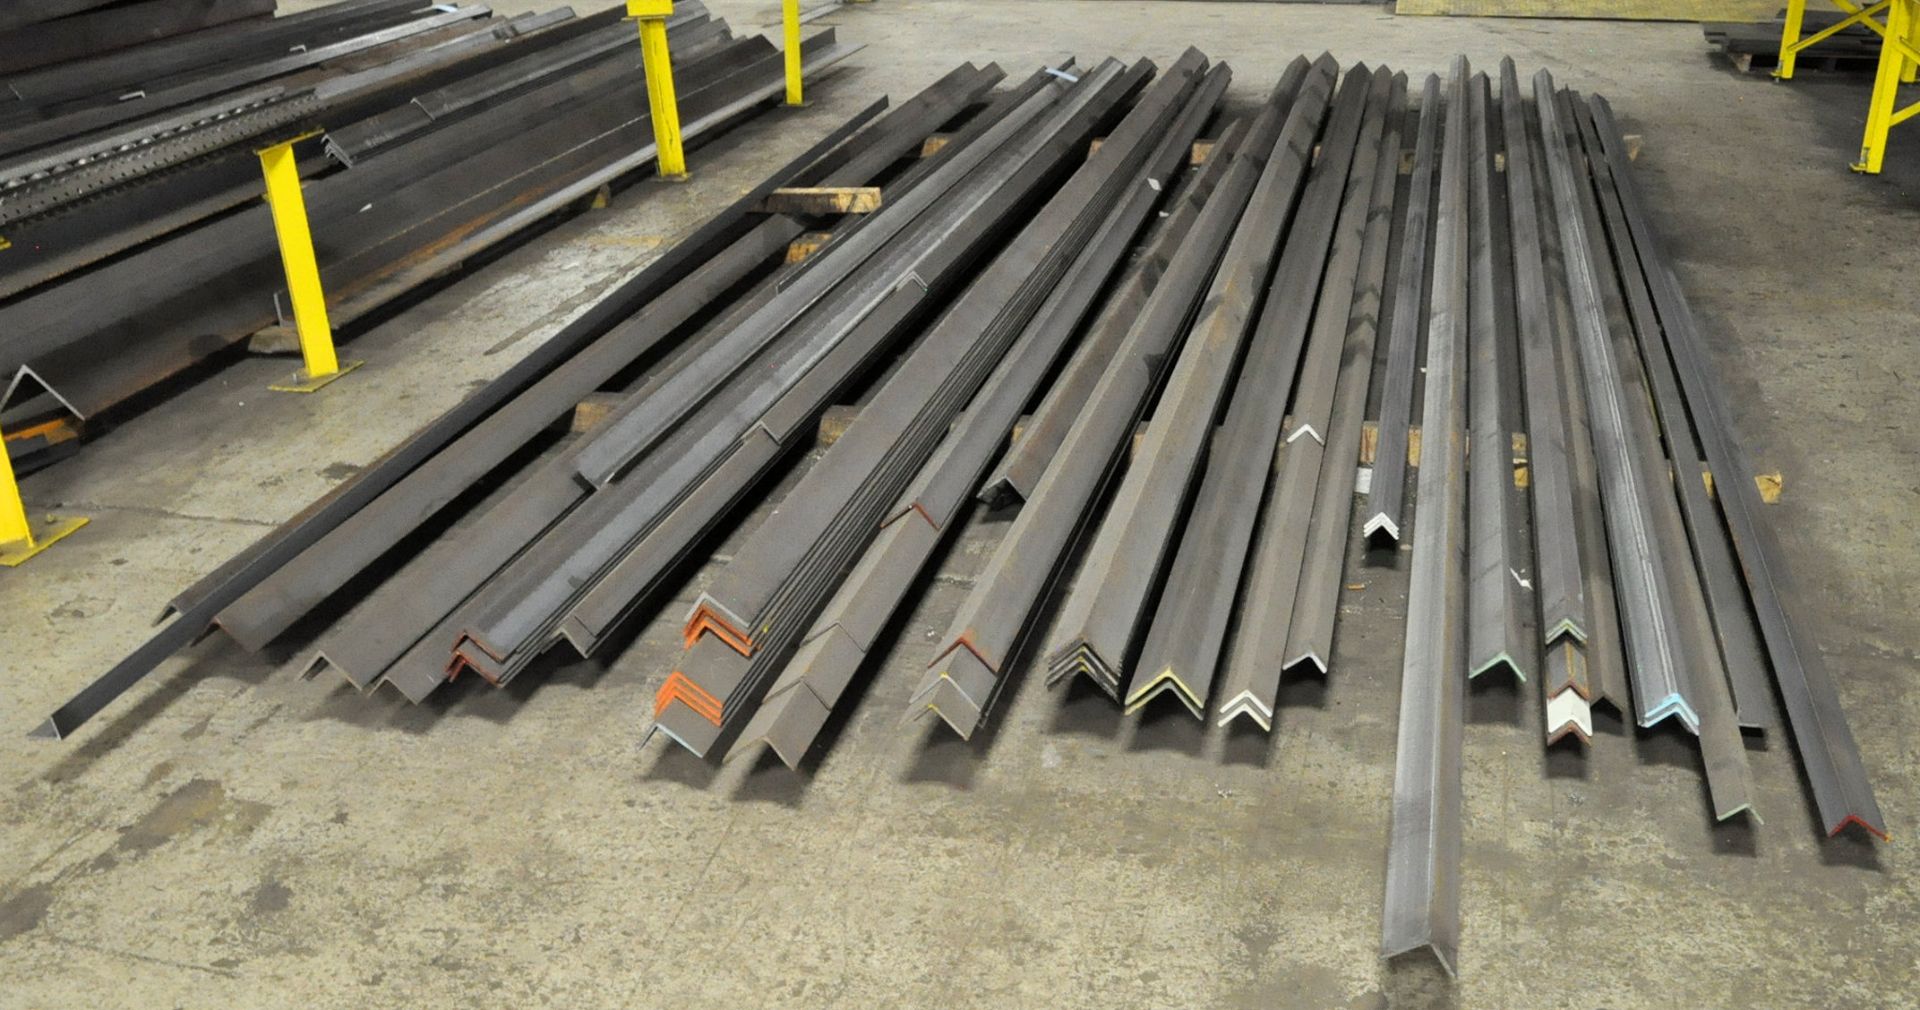 Lot-Steel Angle Iron, Various Widths, Average 20' Lengths, in (1) Group - Image 2 of 2